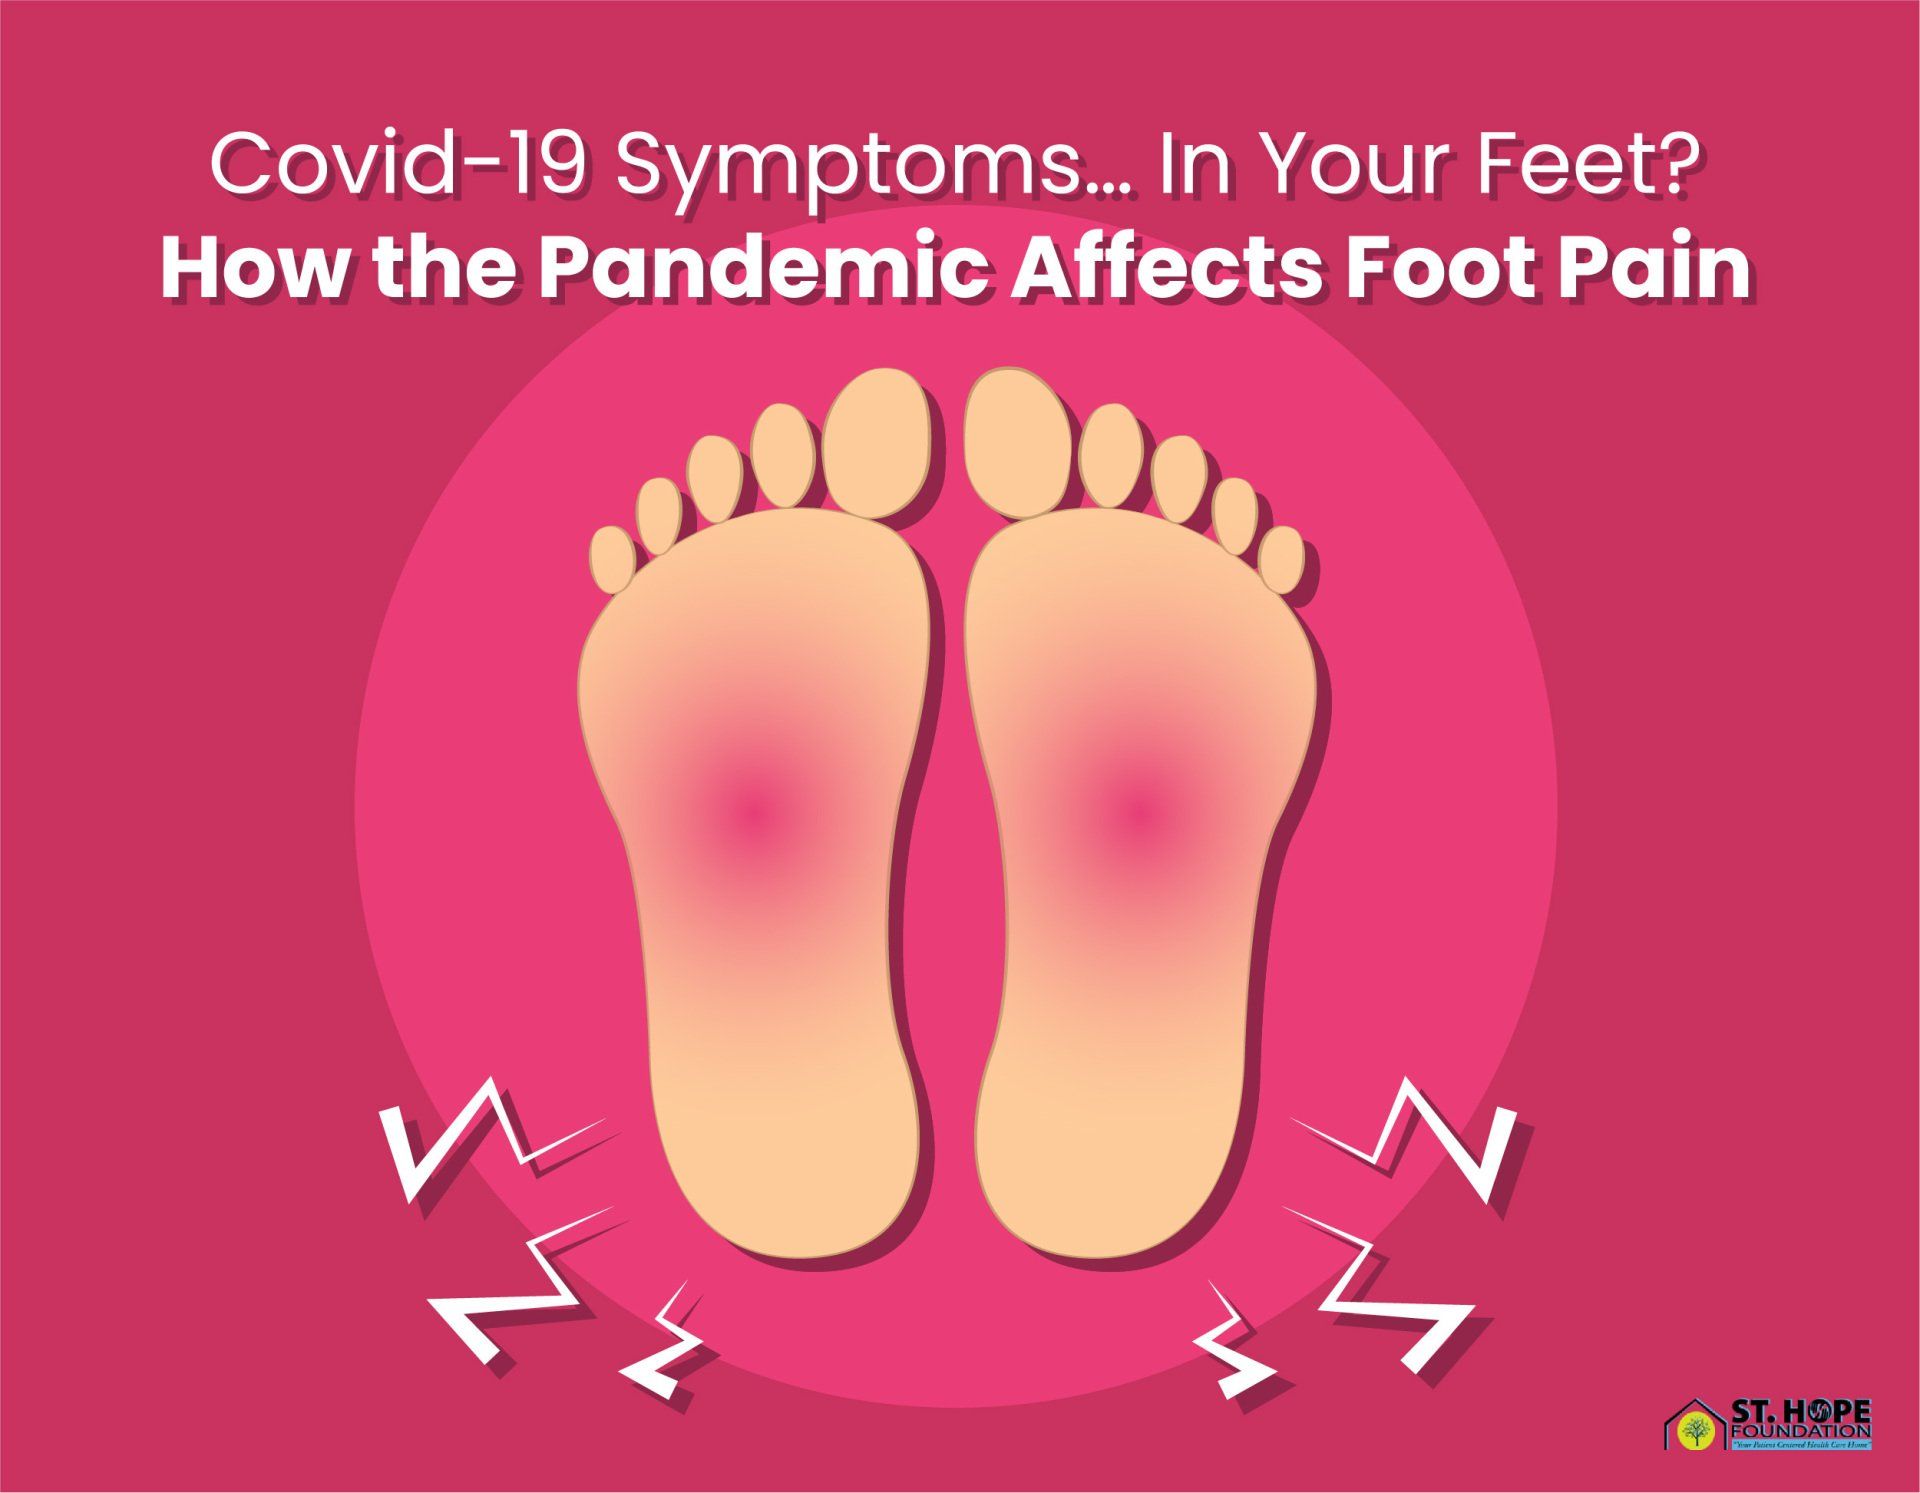 symptoms of Covid-19 in your feet